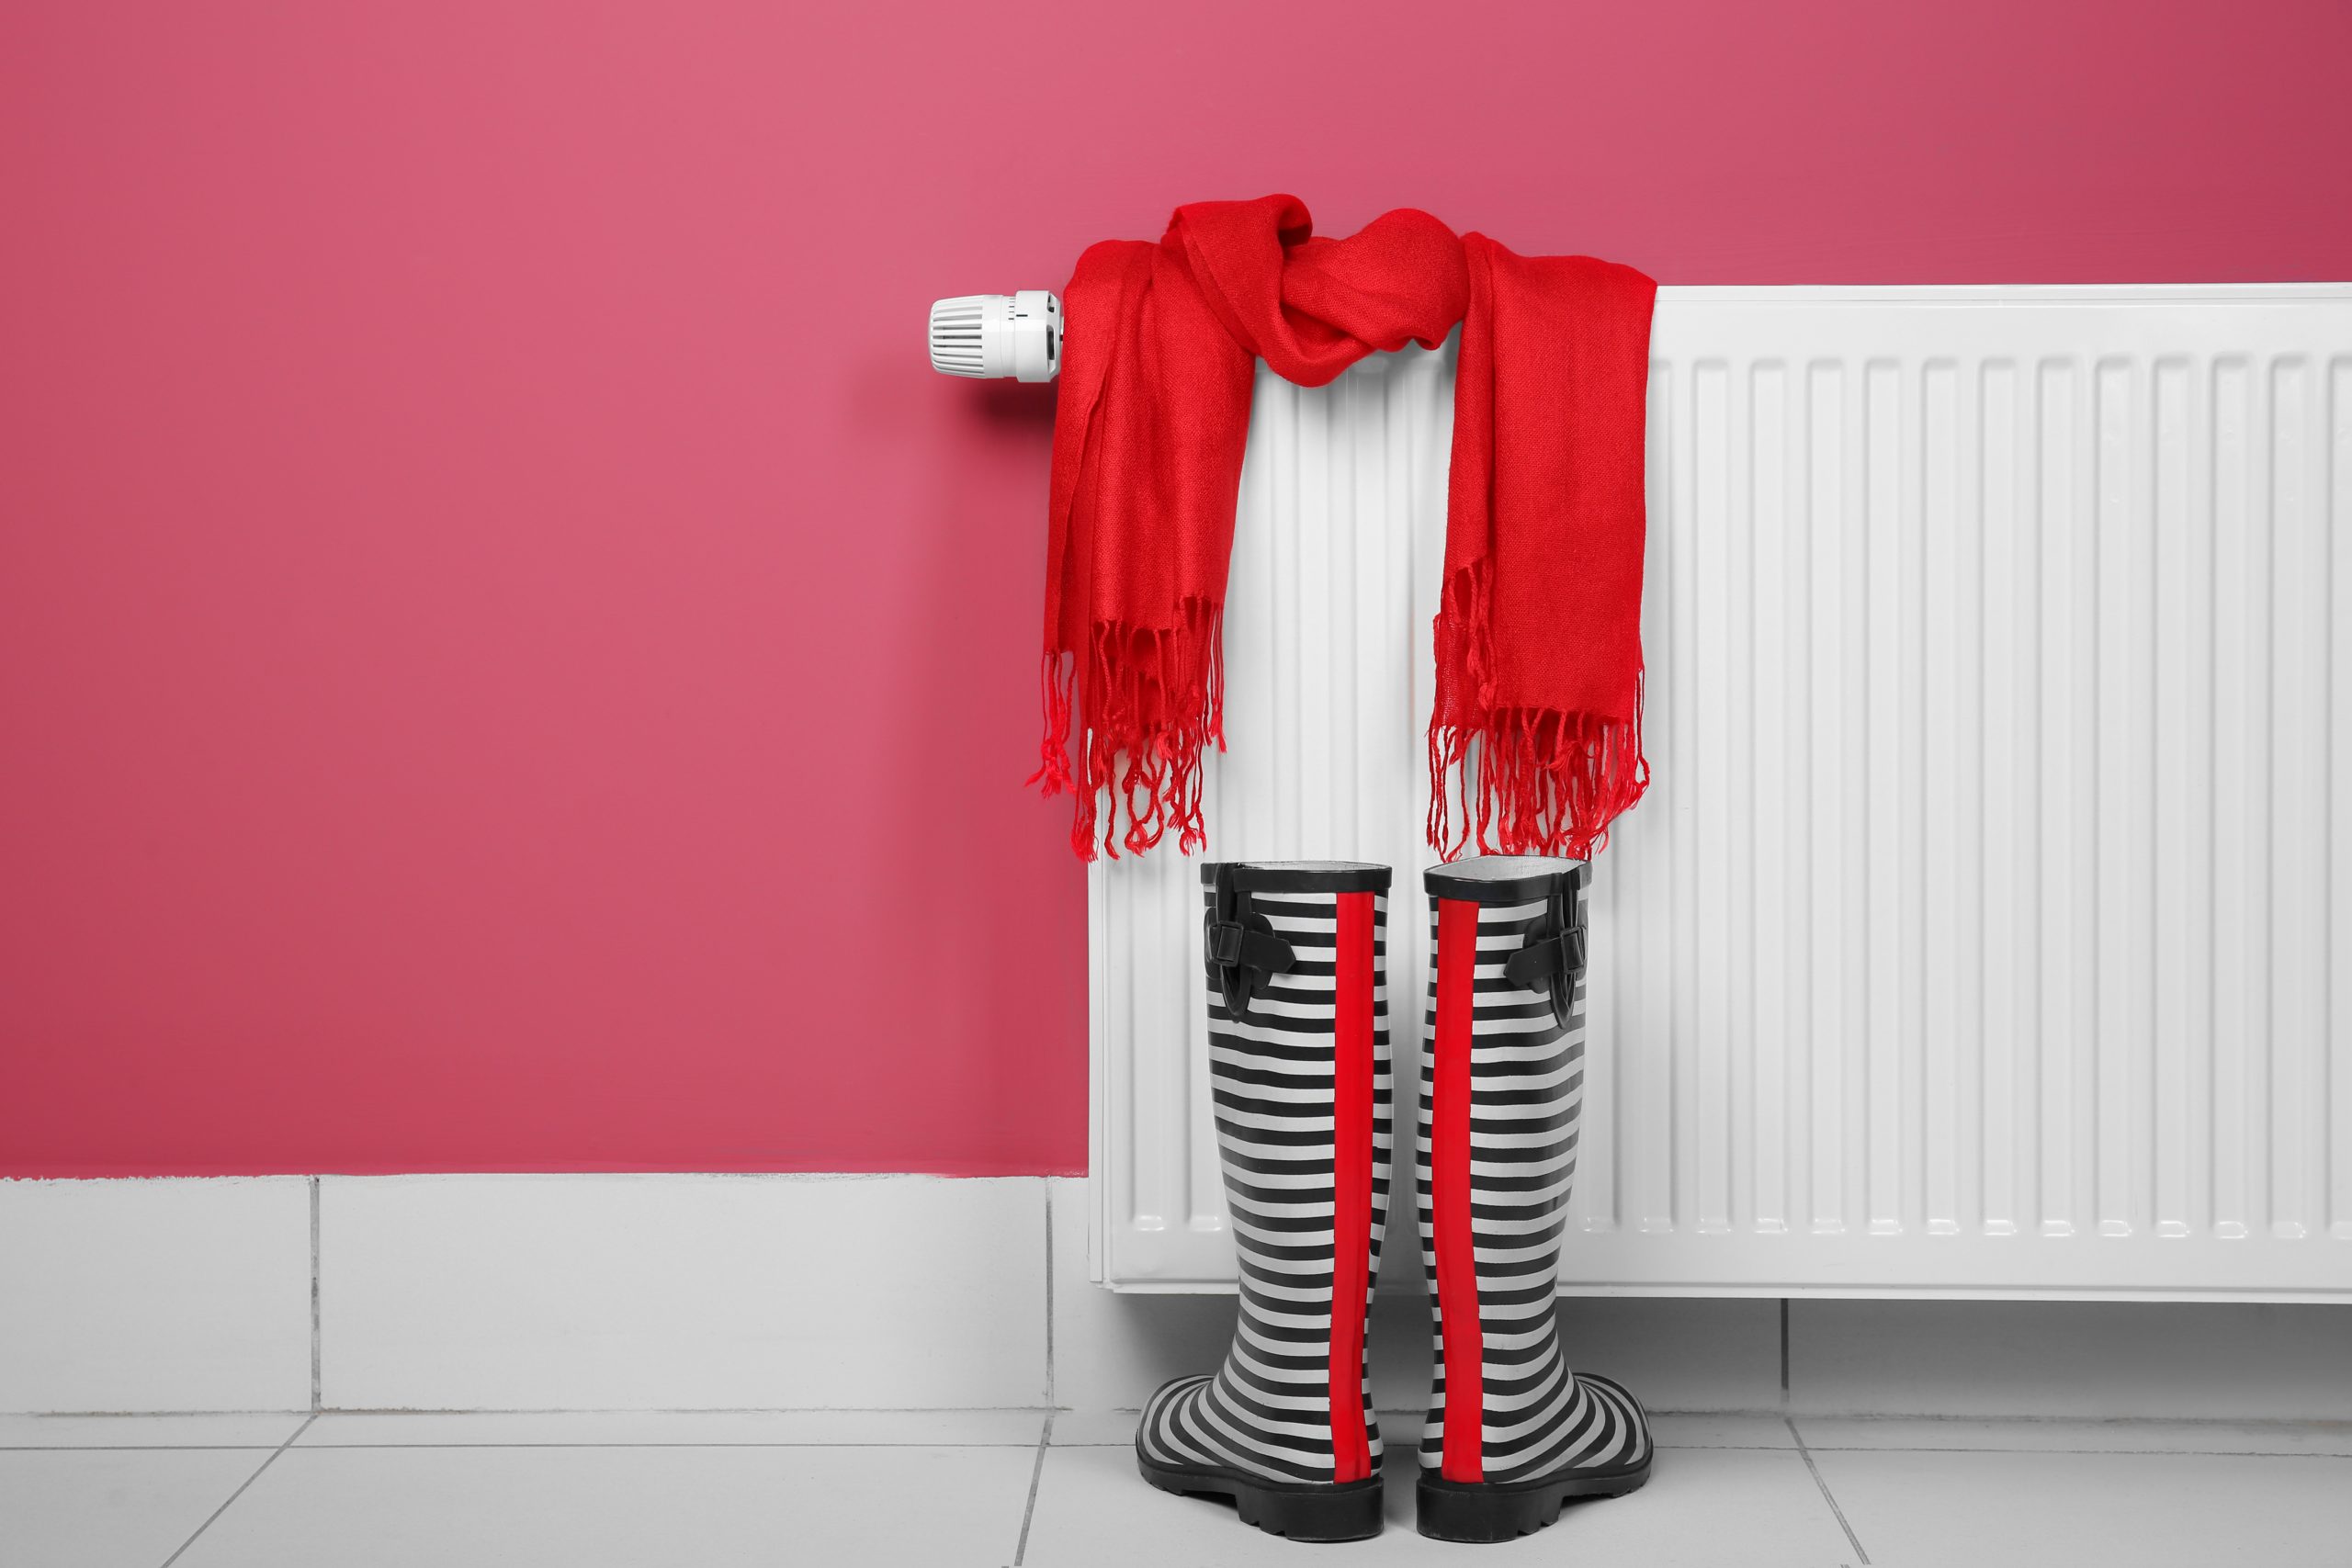 Gumboots and scarf near heating radiator on pink background